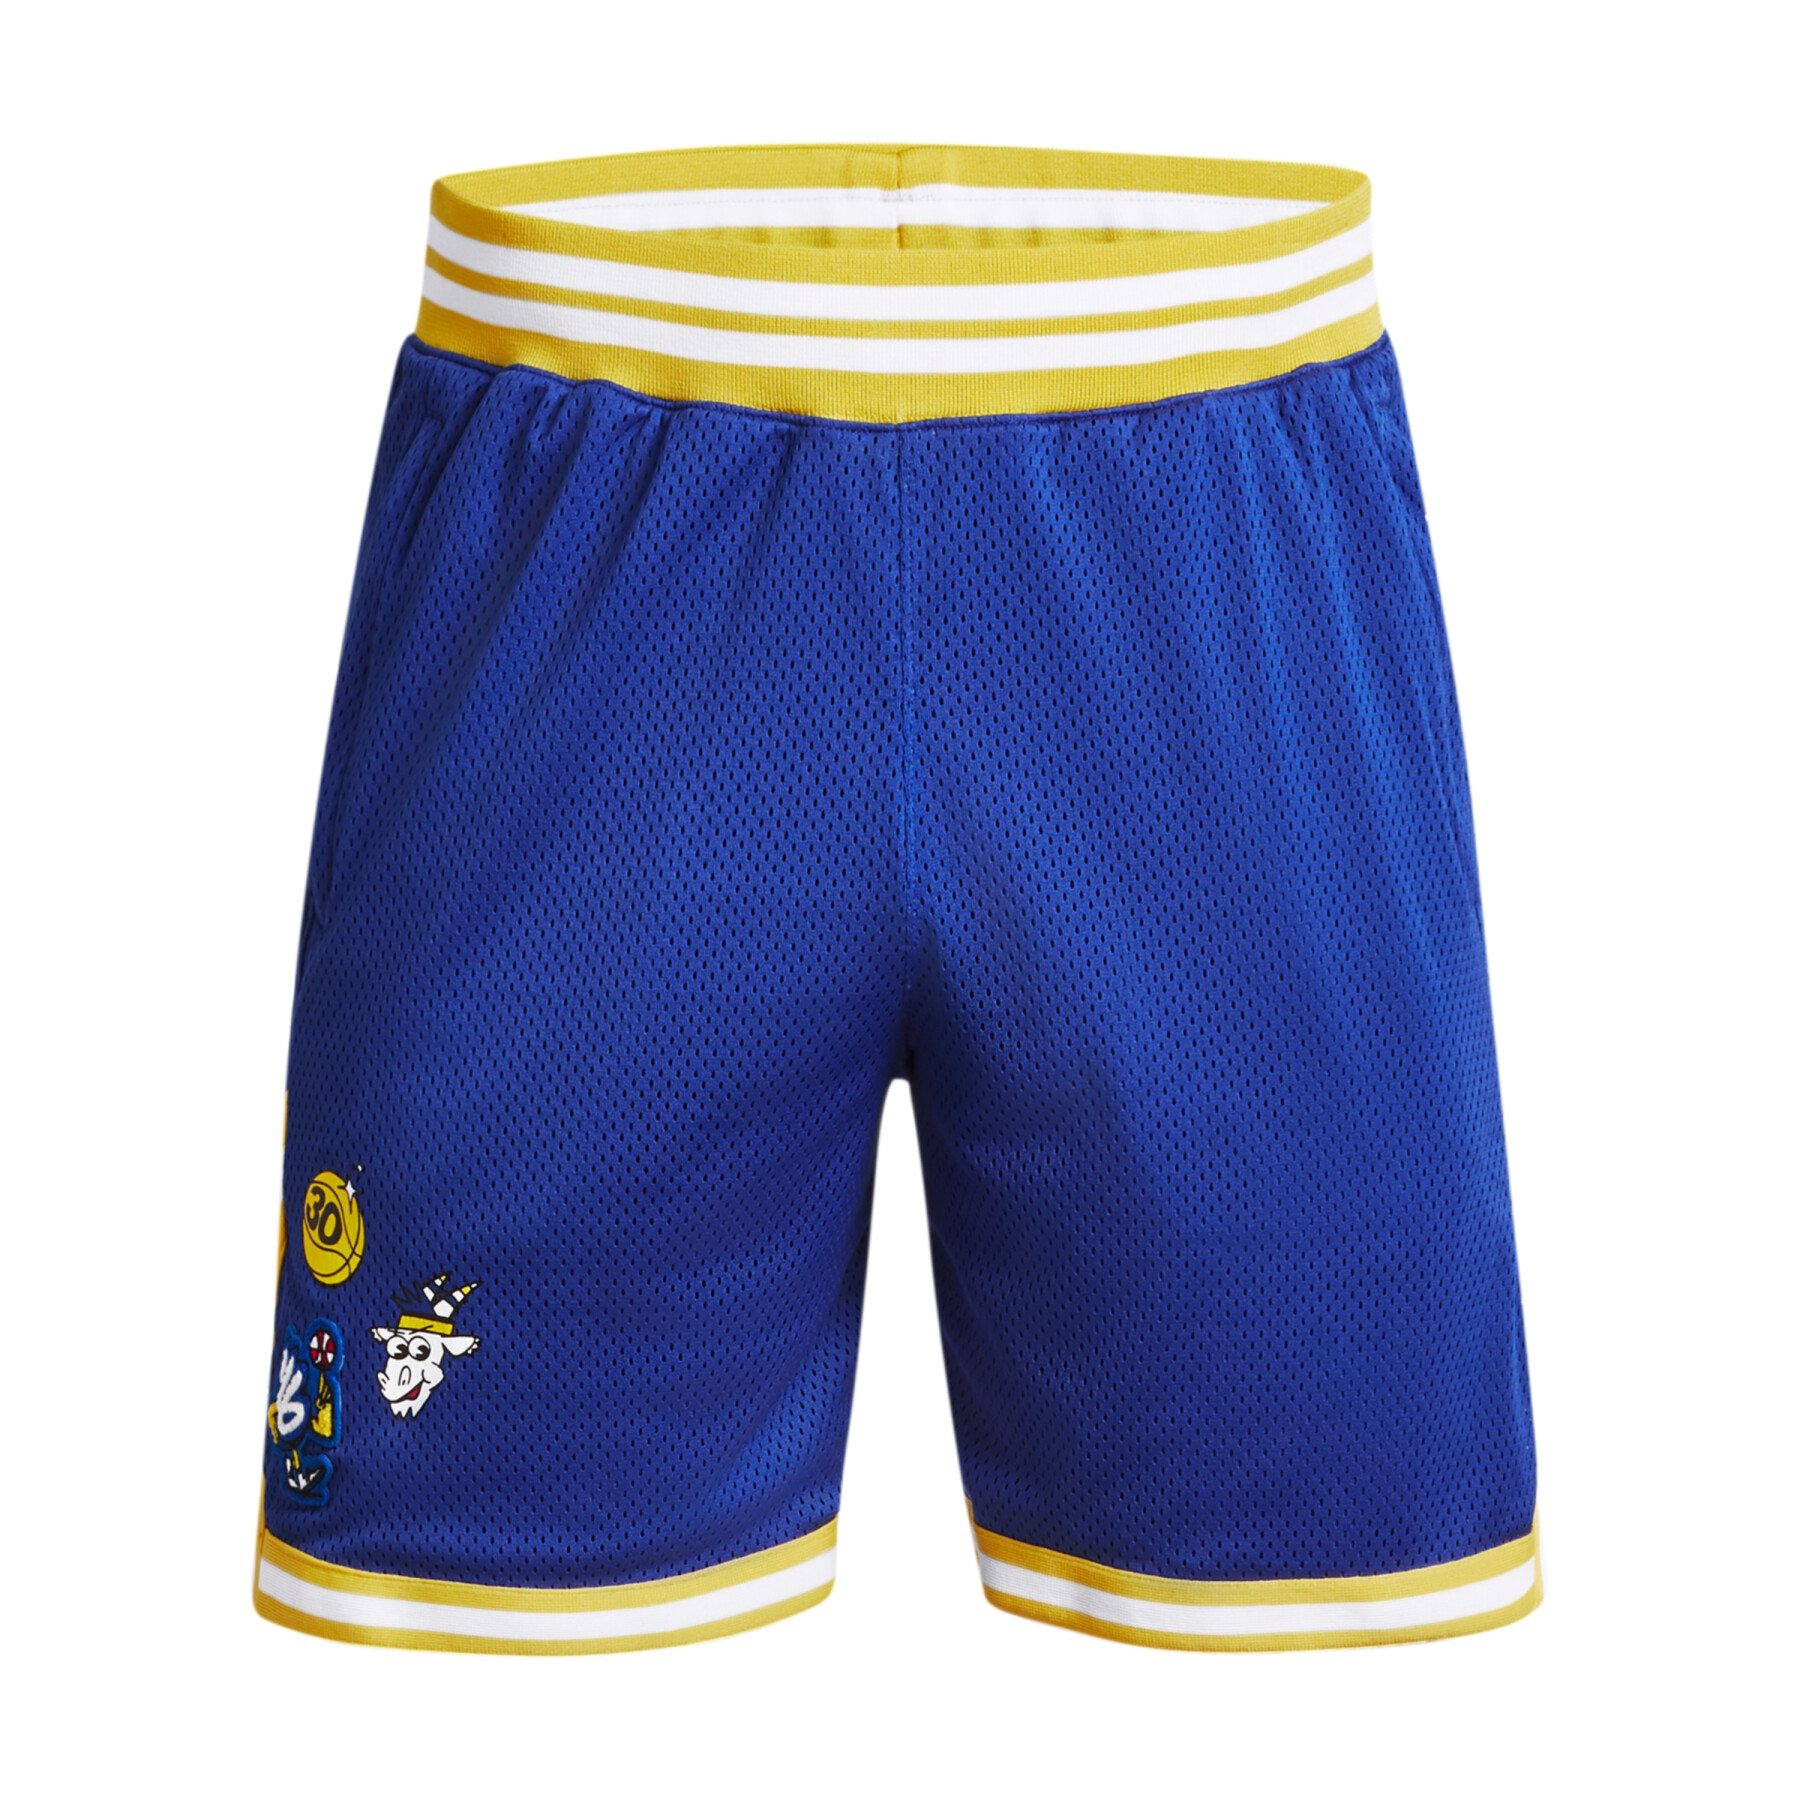 Mesh shorts Under Armour Curry